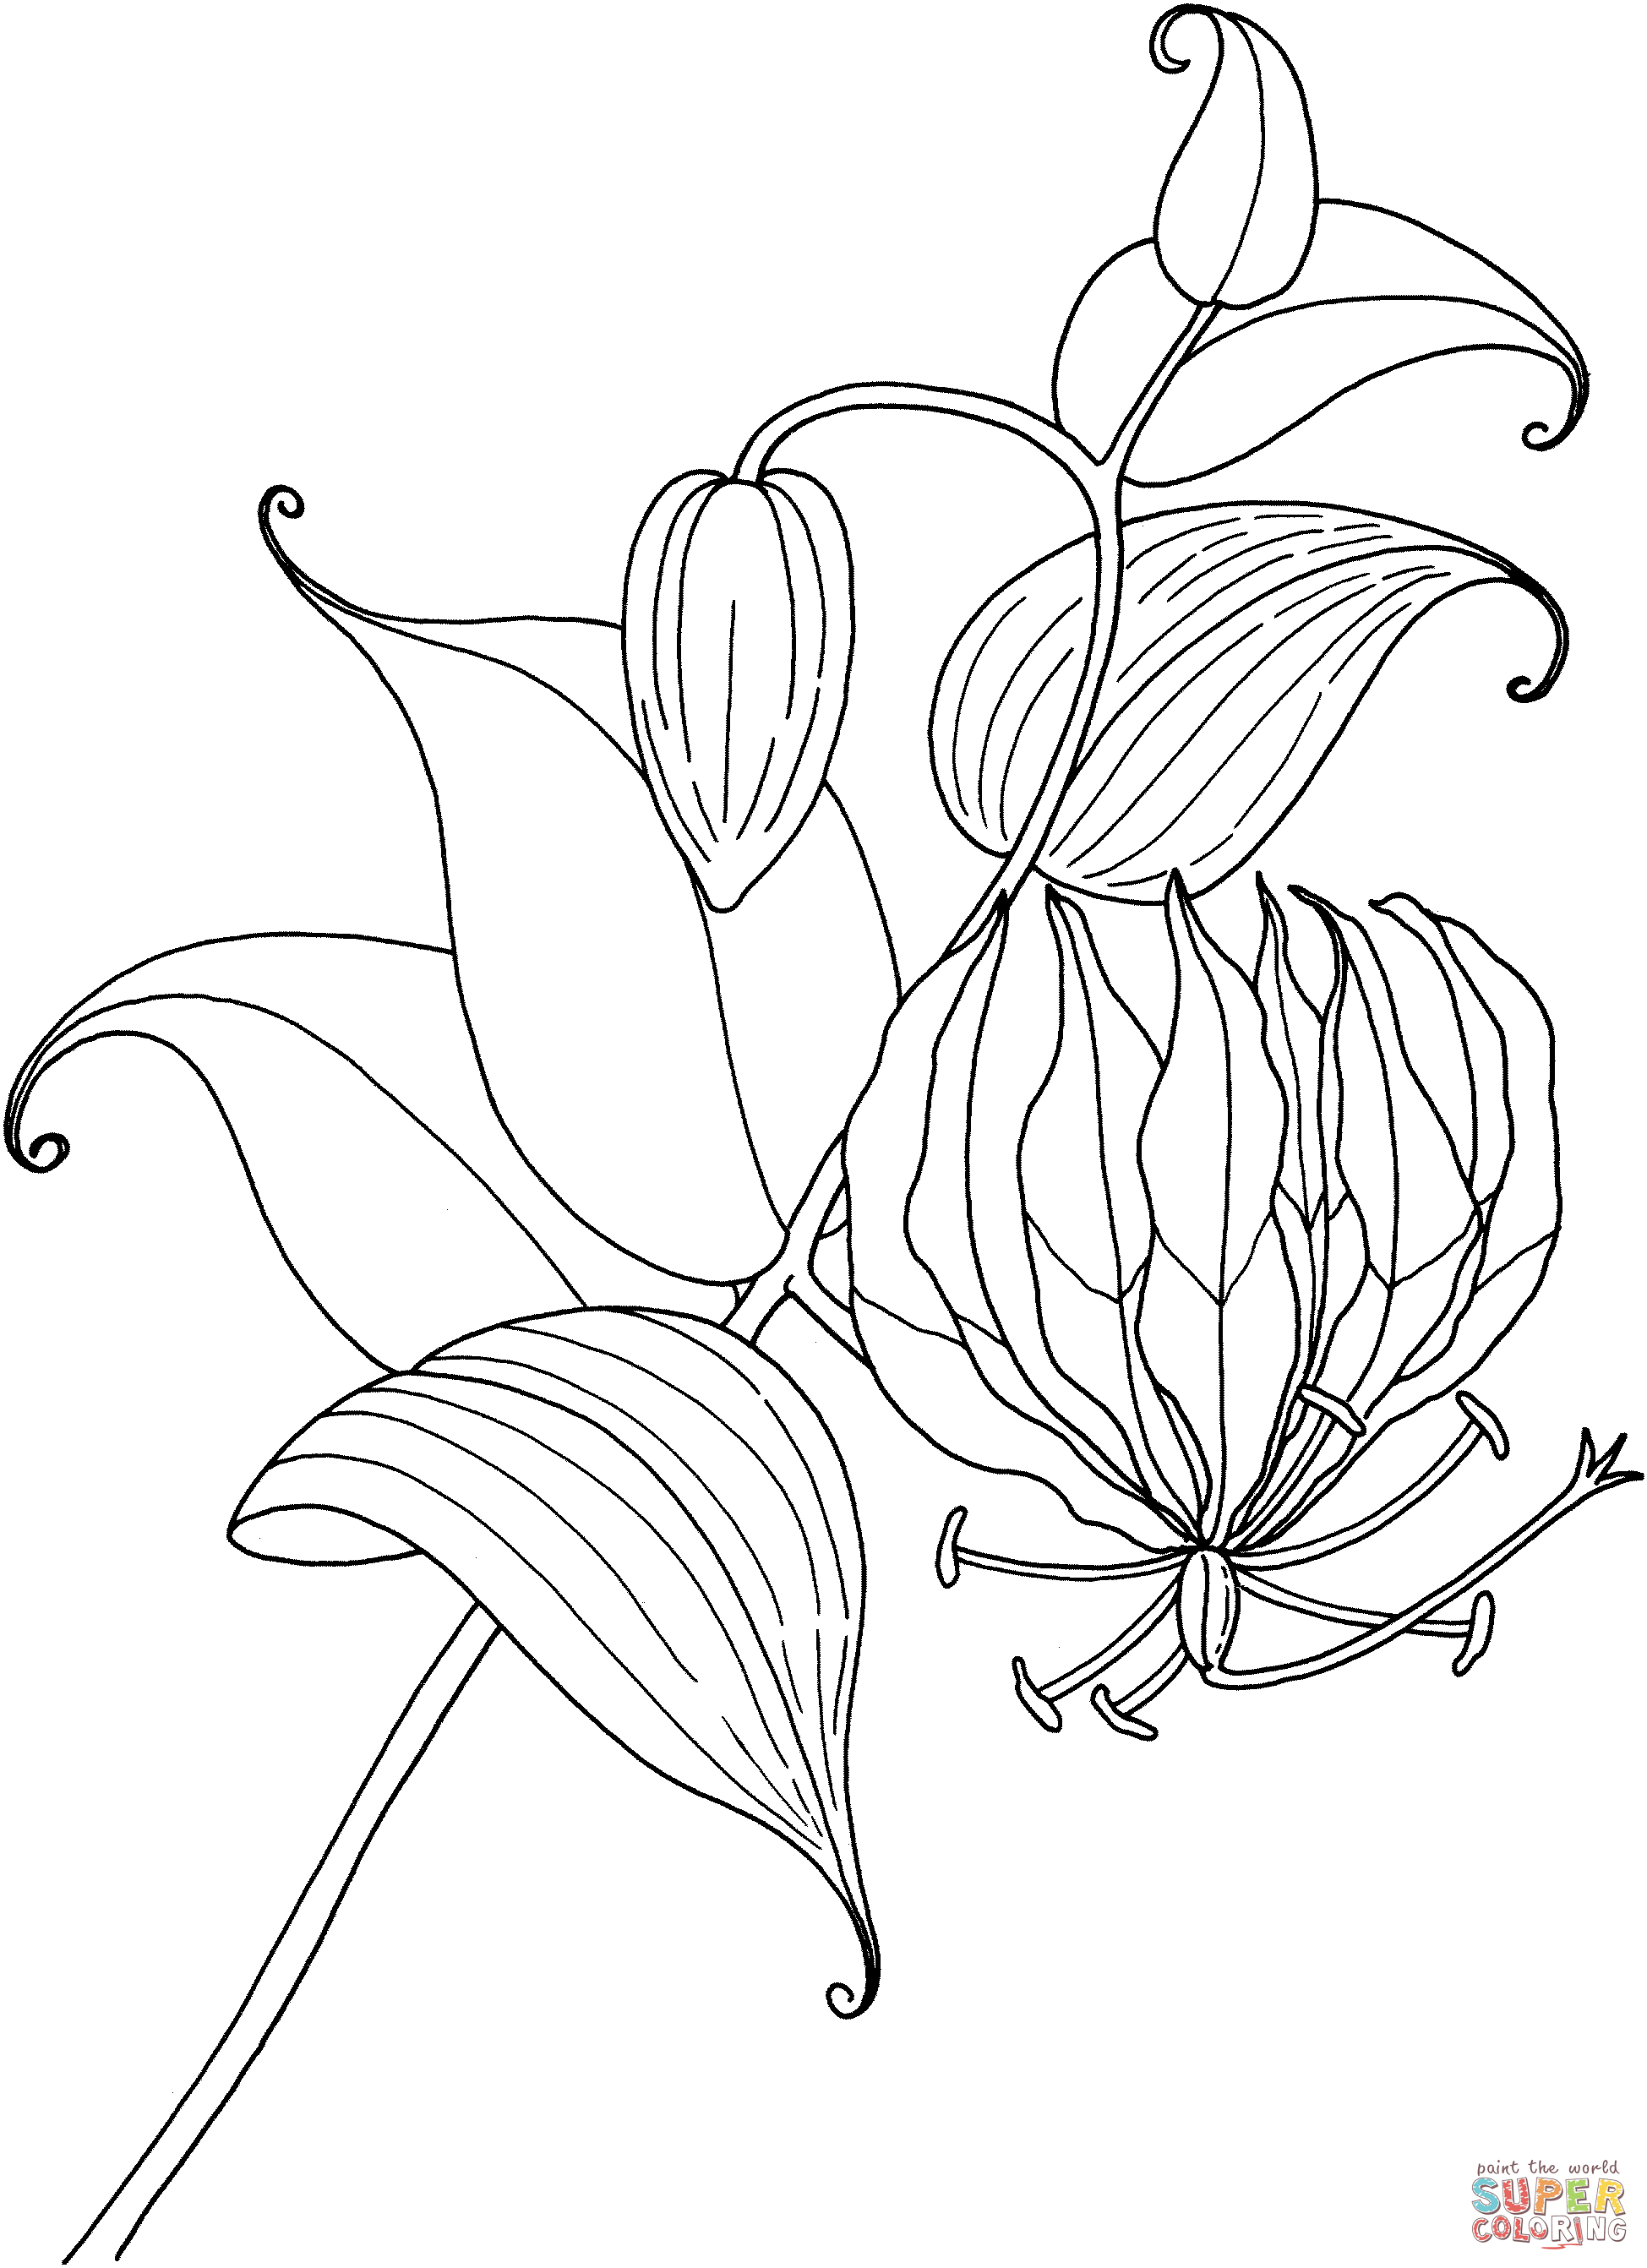 lily-coloring-page-0007-q1